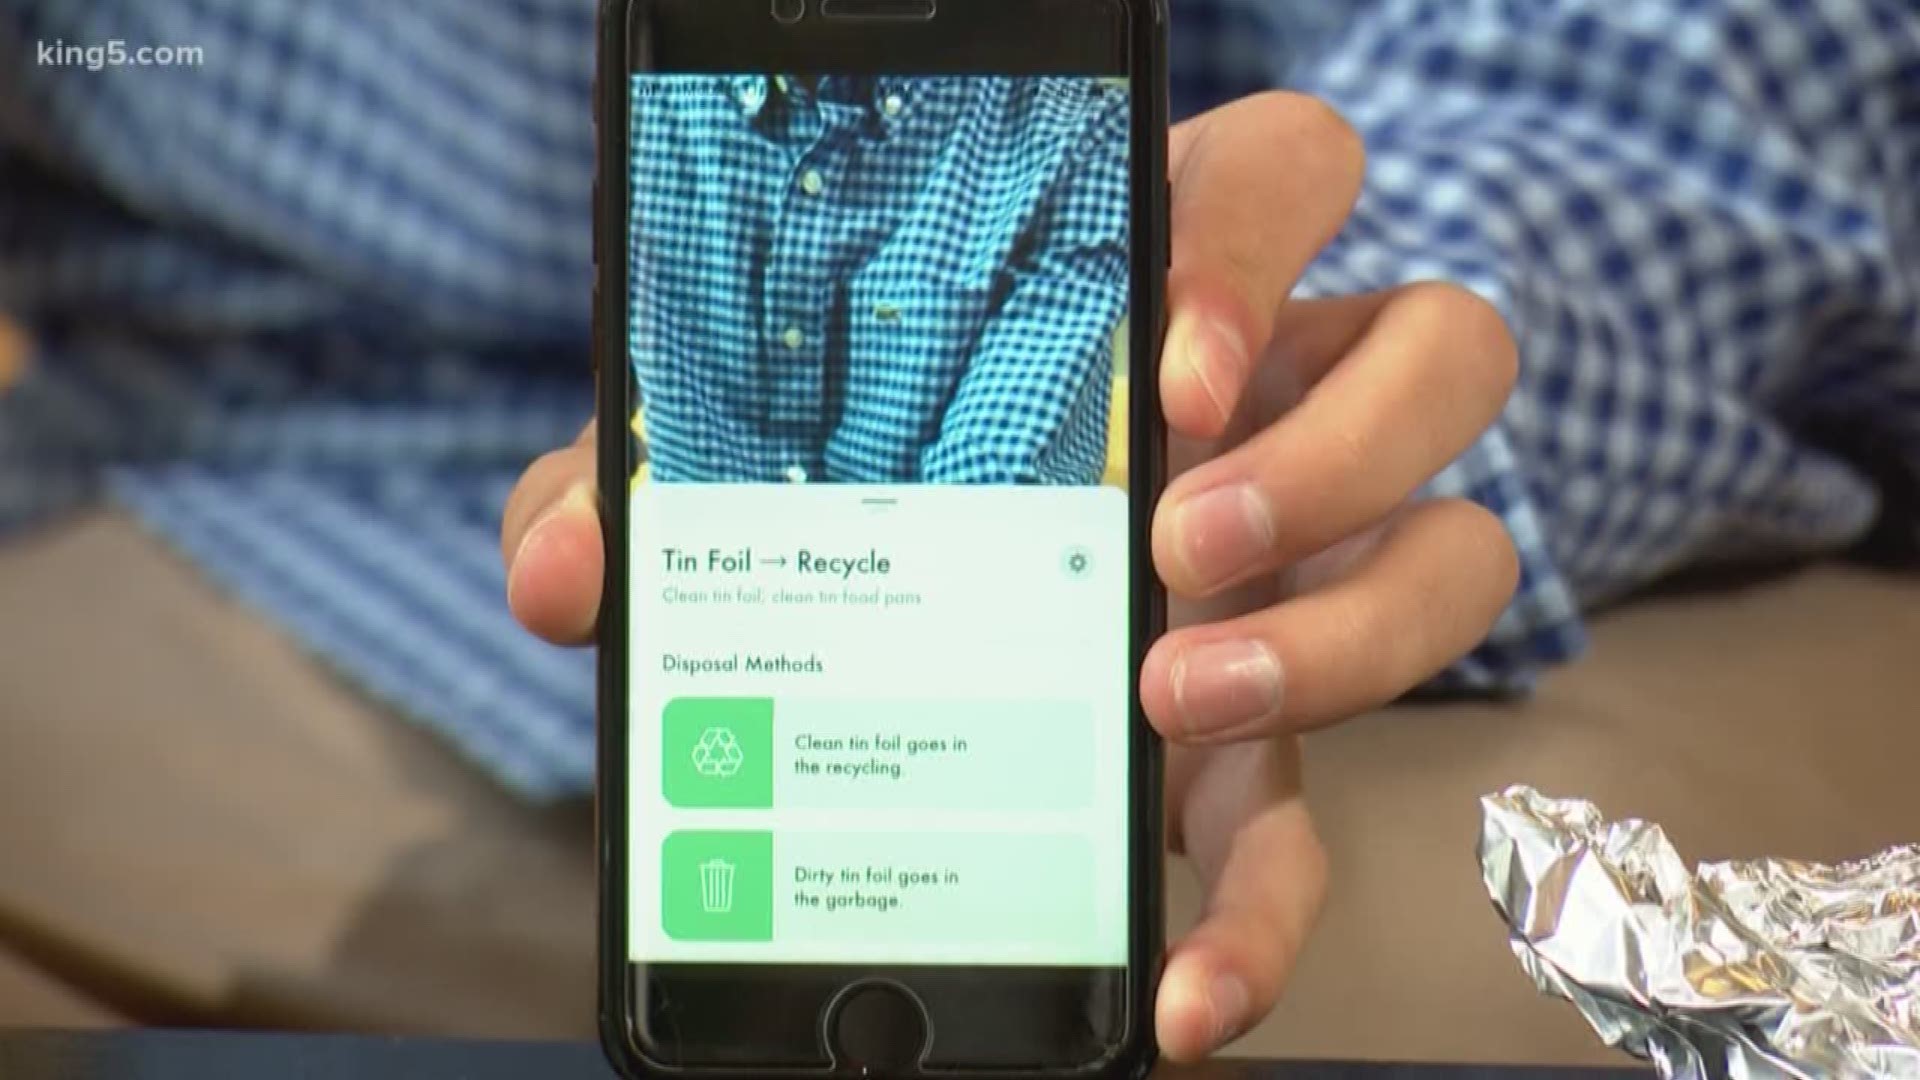 His app called "Wastify" helps you determine how to properly dispose of trash.